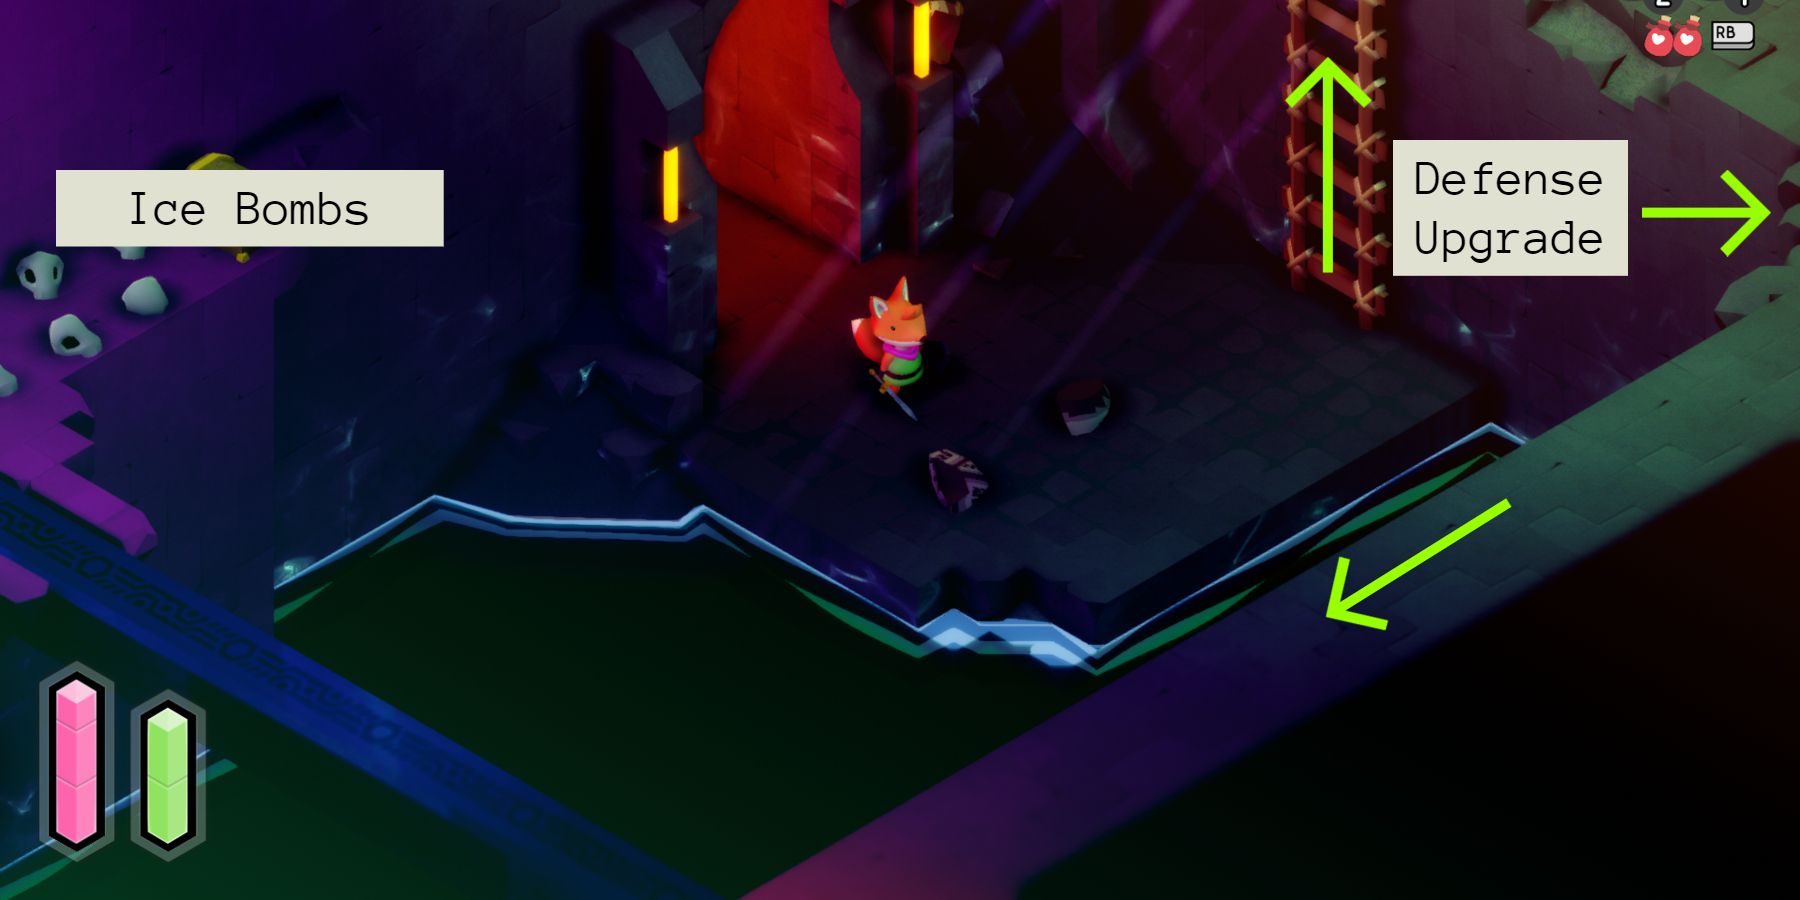 a red fox standing on the lower level of a two-story room. a ladder with a green arrow over it reaches up the next level, and a text box that reads "Defense Upgrade' points to something offscreen. another green arrow points down the thin path at the top of the room, and another textbox over a treasure chest on the other side of the room reads "ice boms"